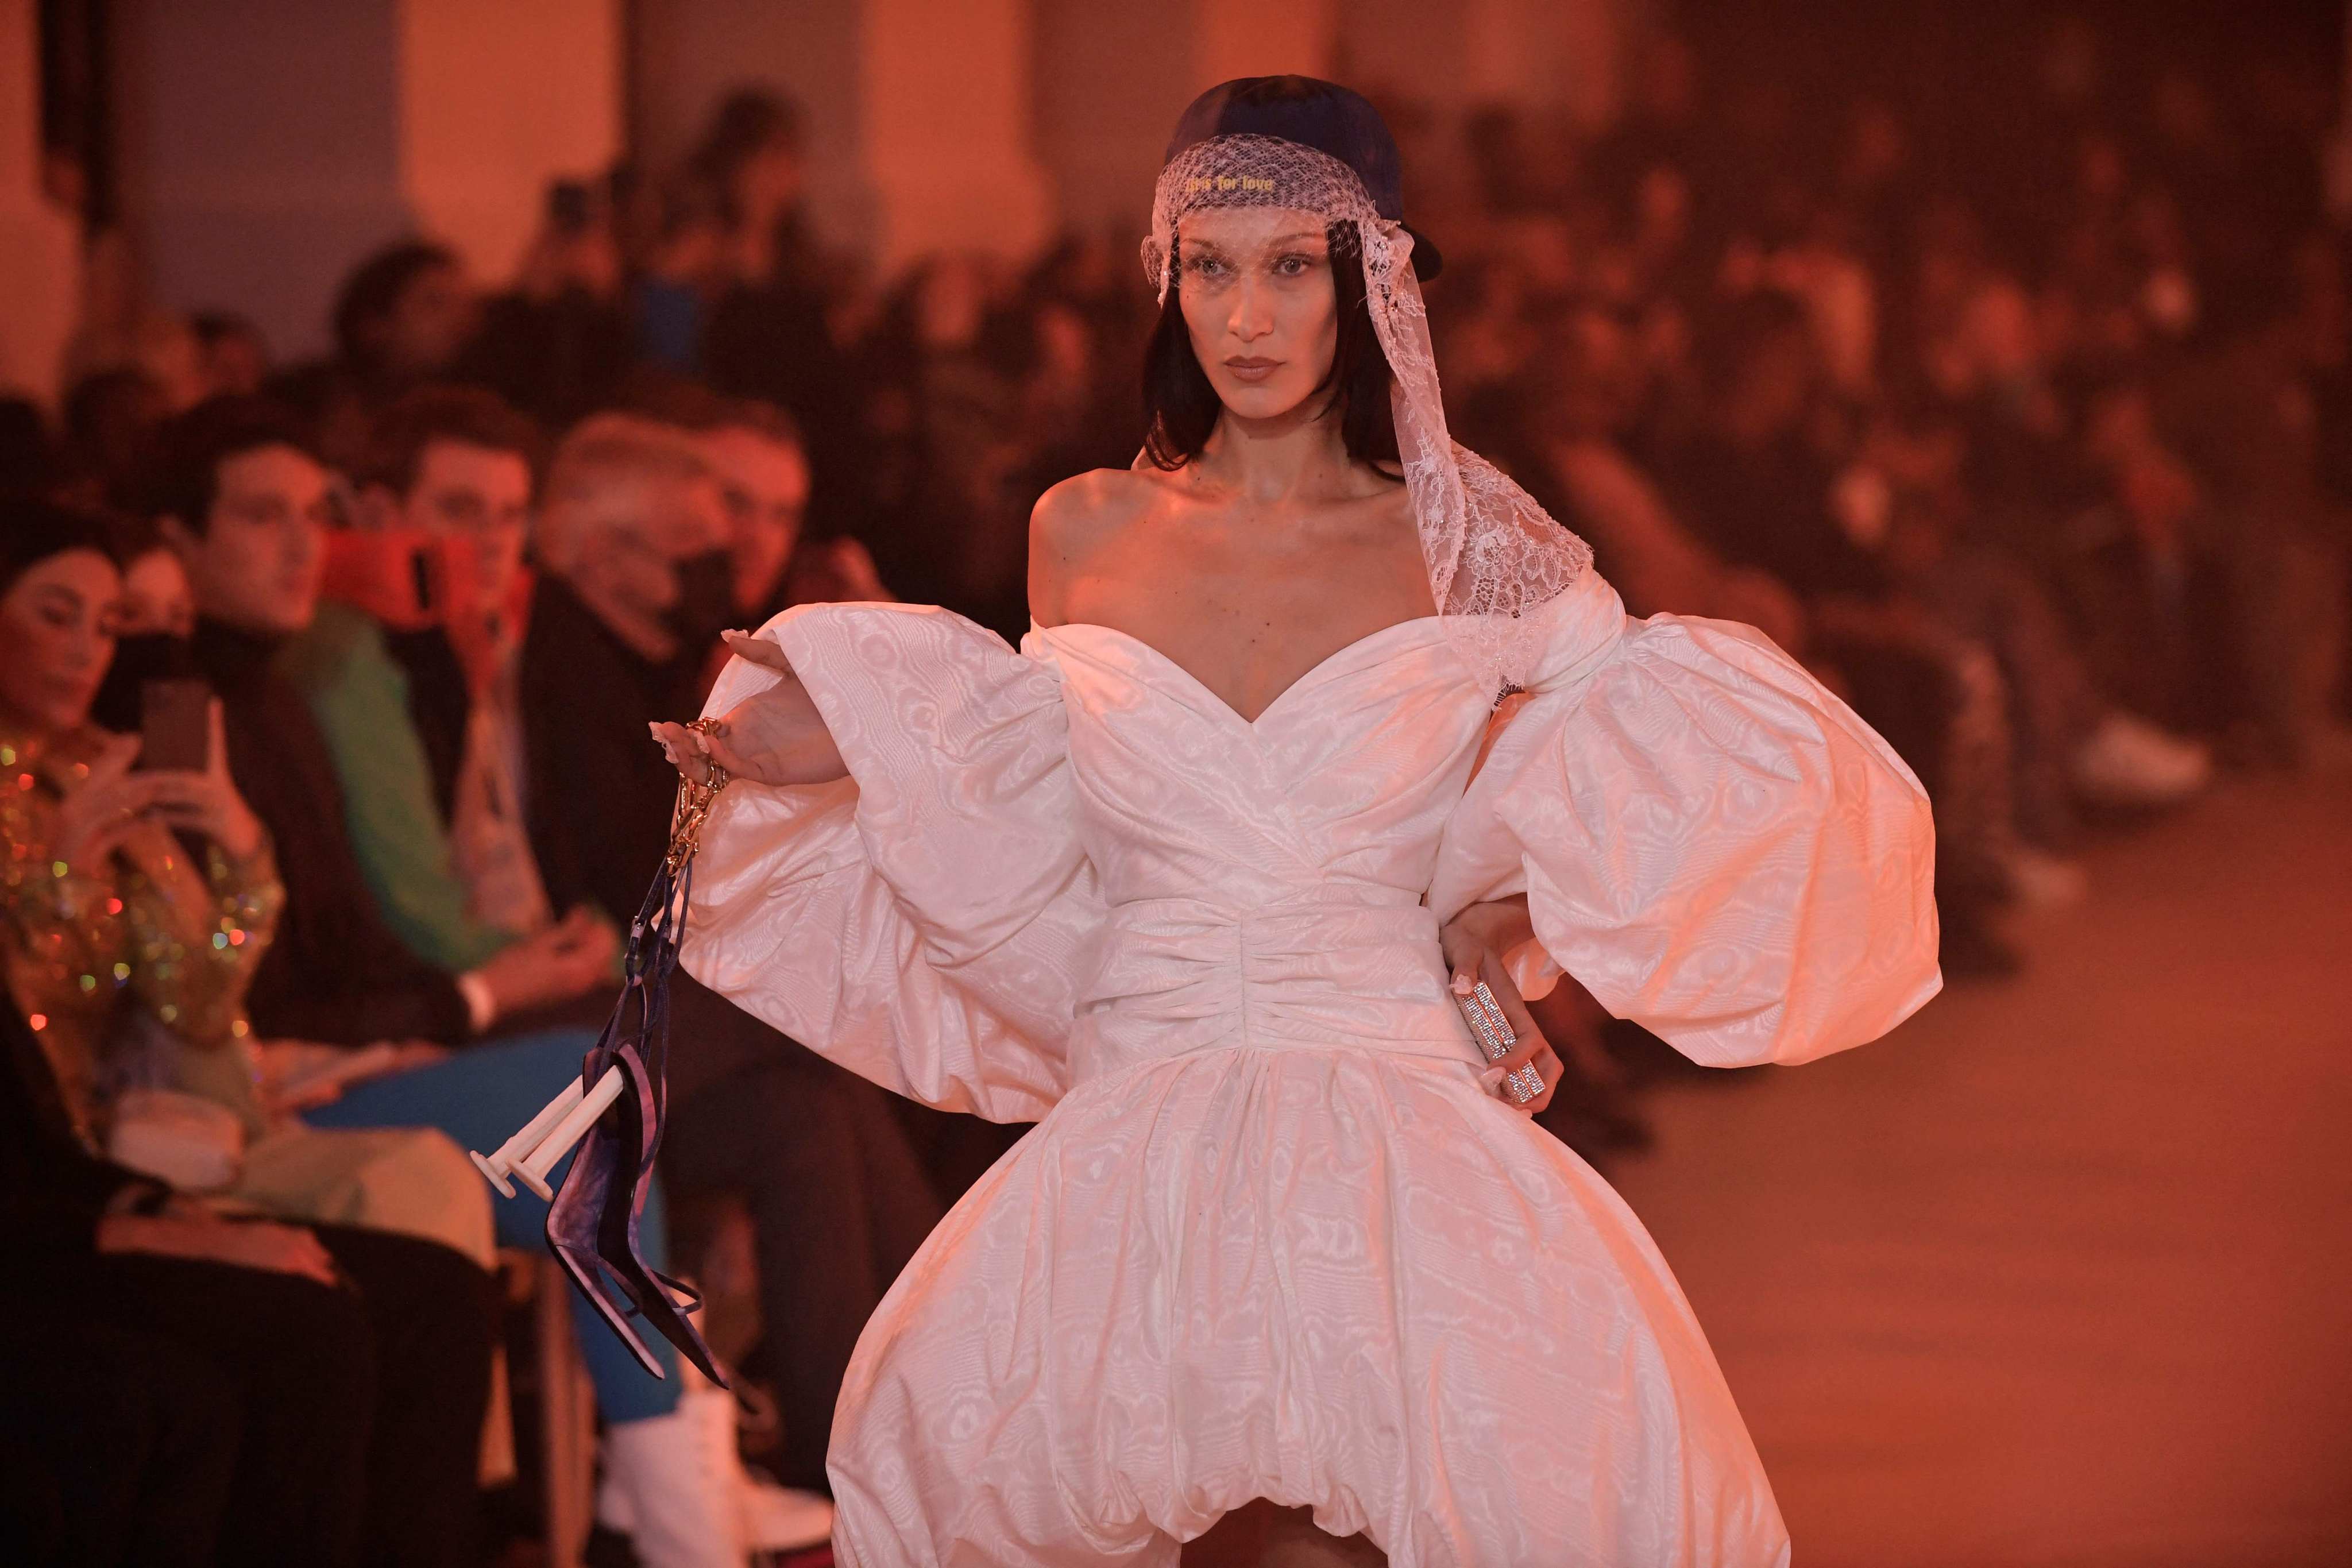 Paris Fashion Week 2022: Virgil Abloh's final Off-White show was a  bittersweet celebration of 'Spaceship Earth', brought to life by Gigi and  Bella Hadid, Kendall Jenner and Candice Swanepoel